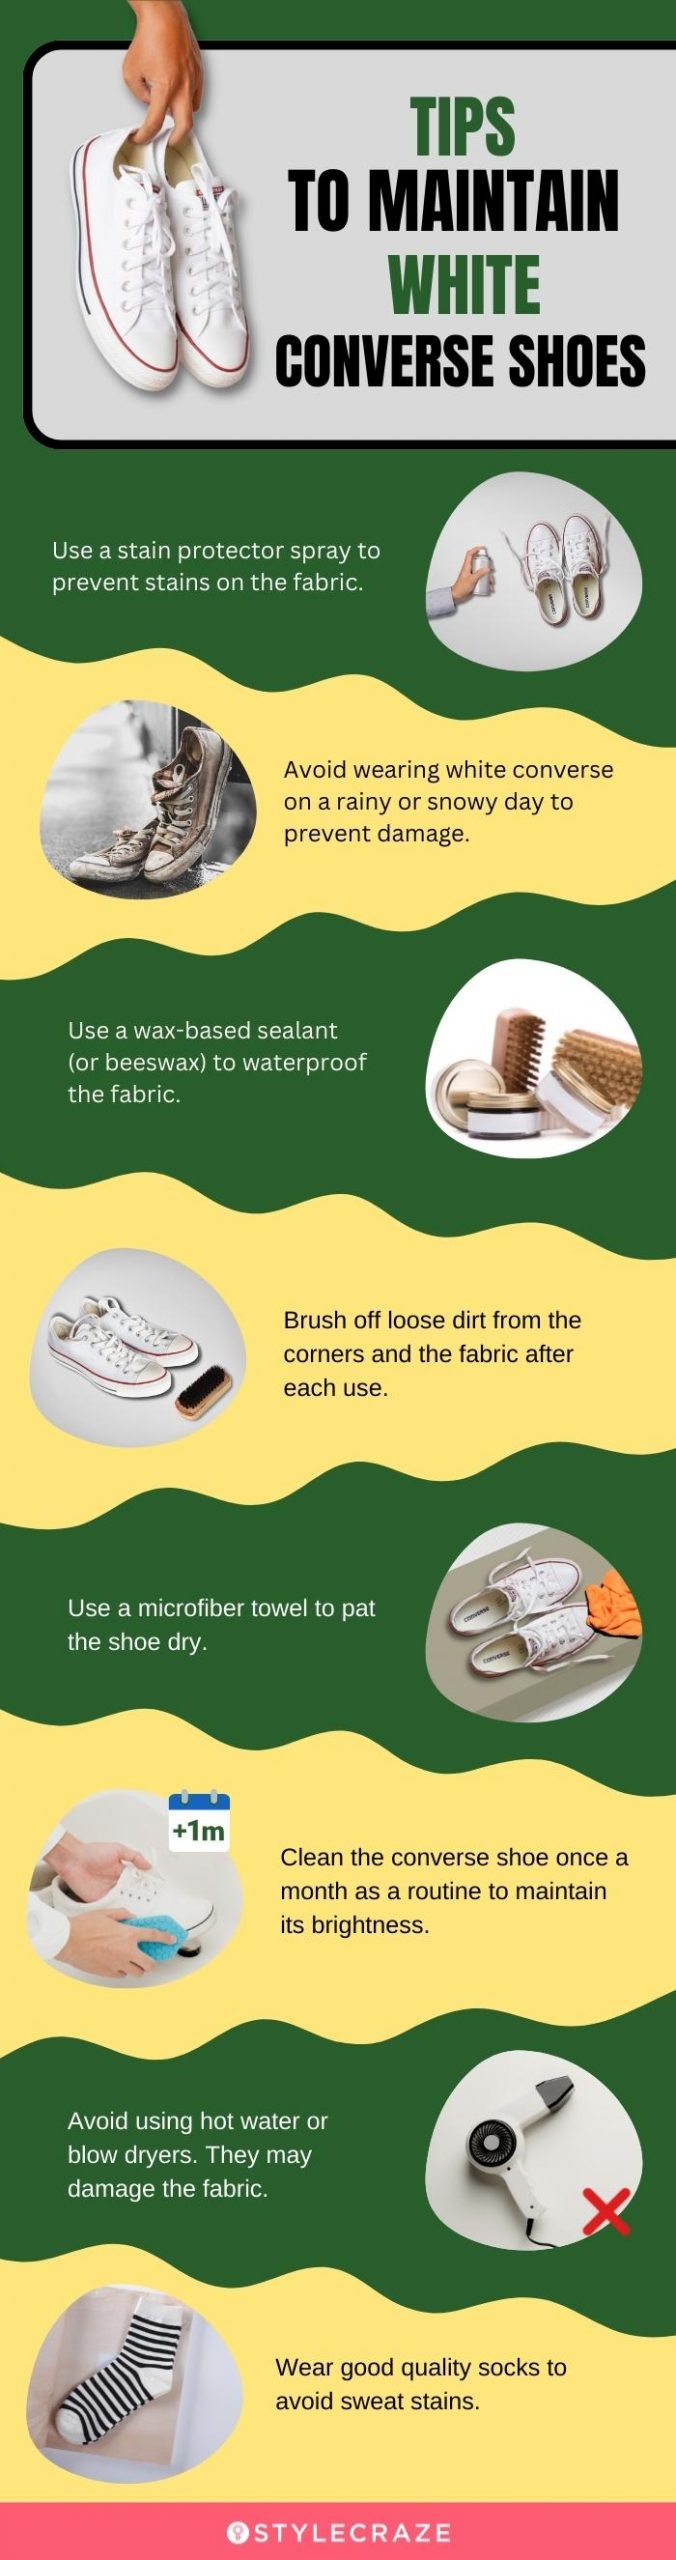 tips to maintain white converse shoes (infographic)